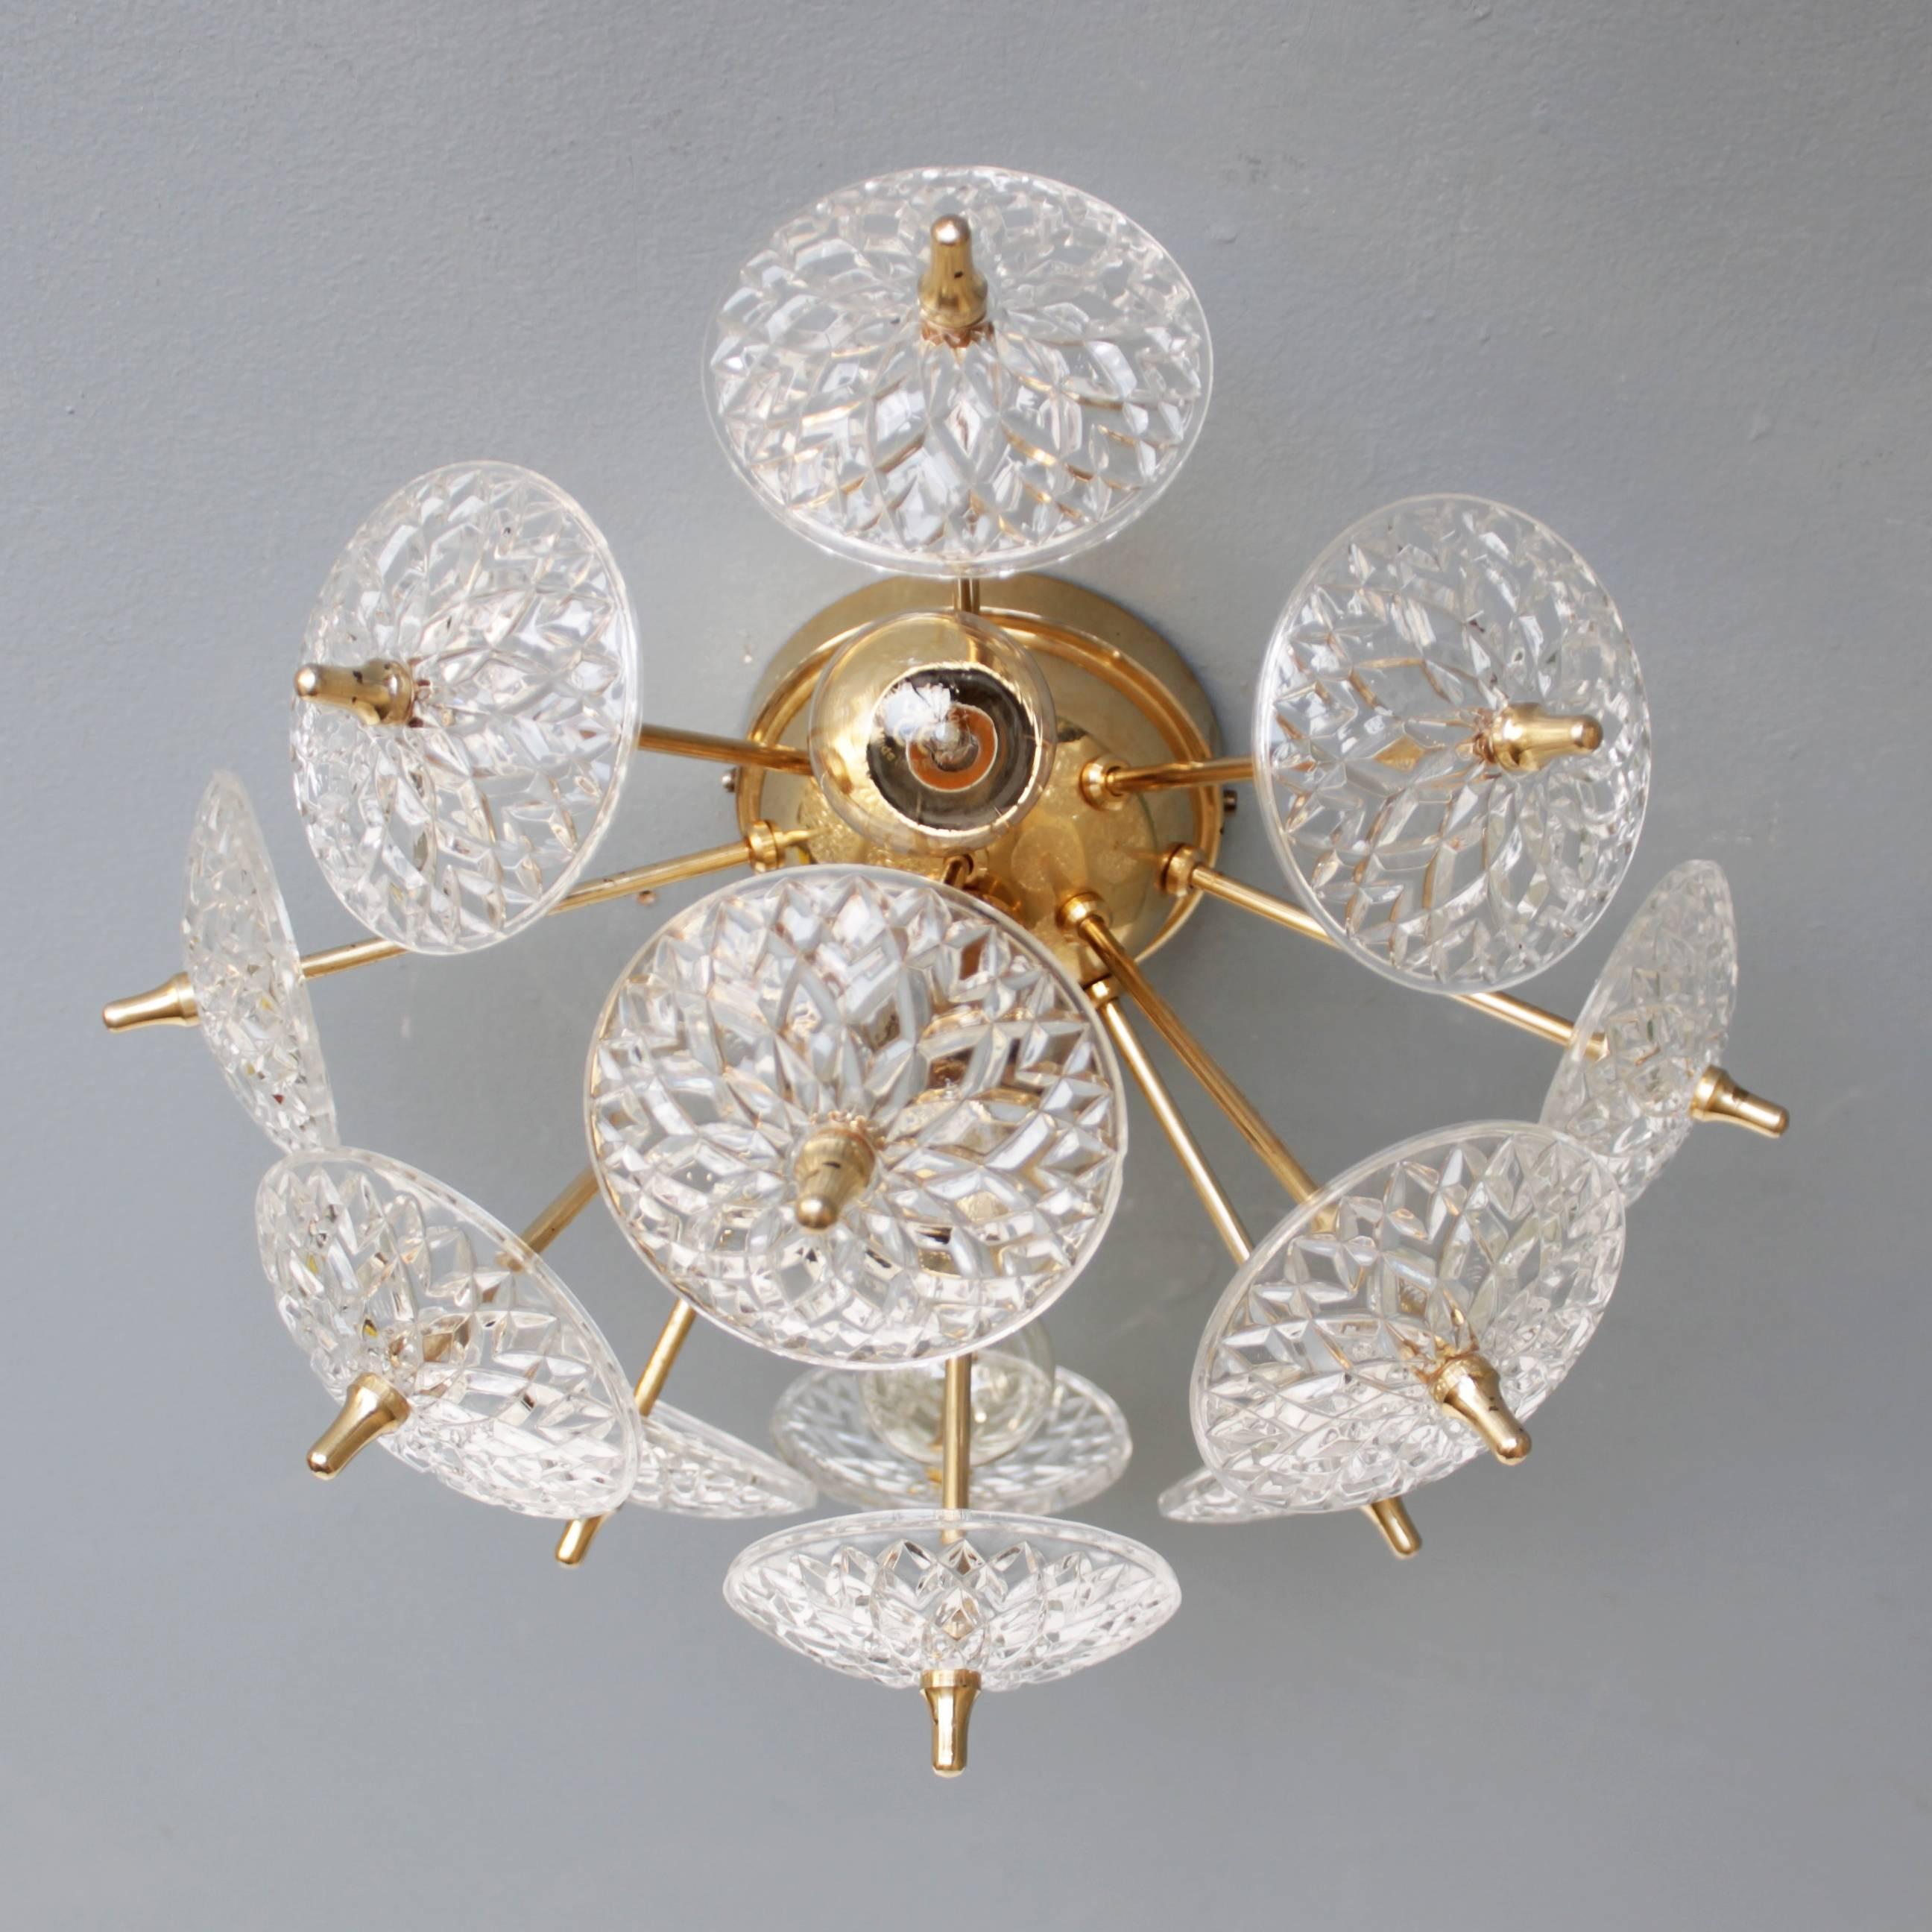 Mid-20th Century Wall Light or Flush Mount by Val St Lambert